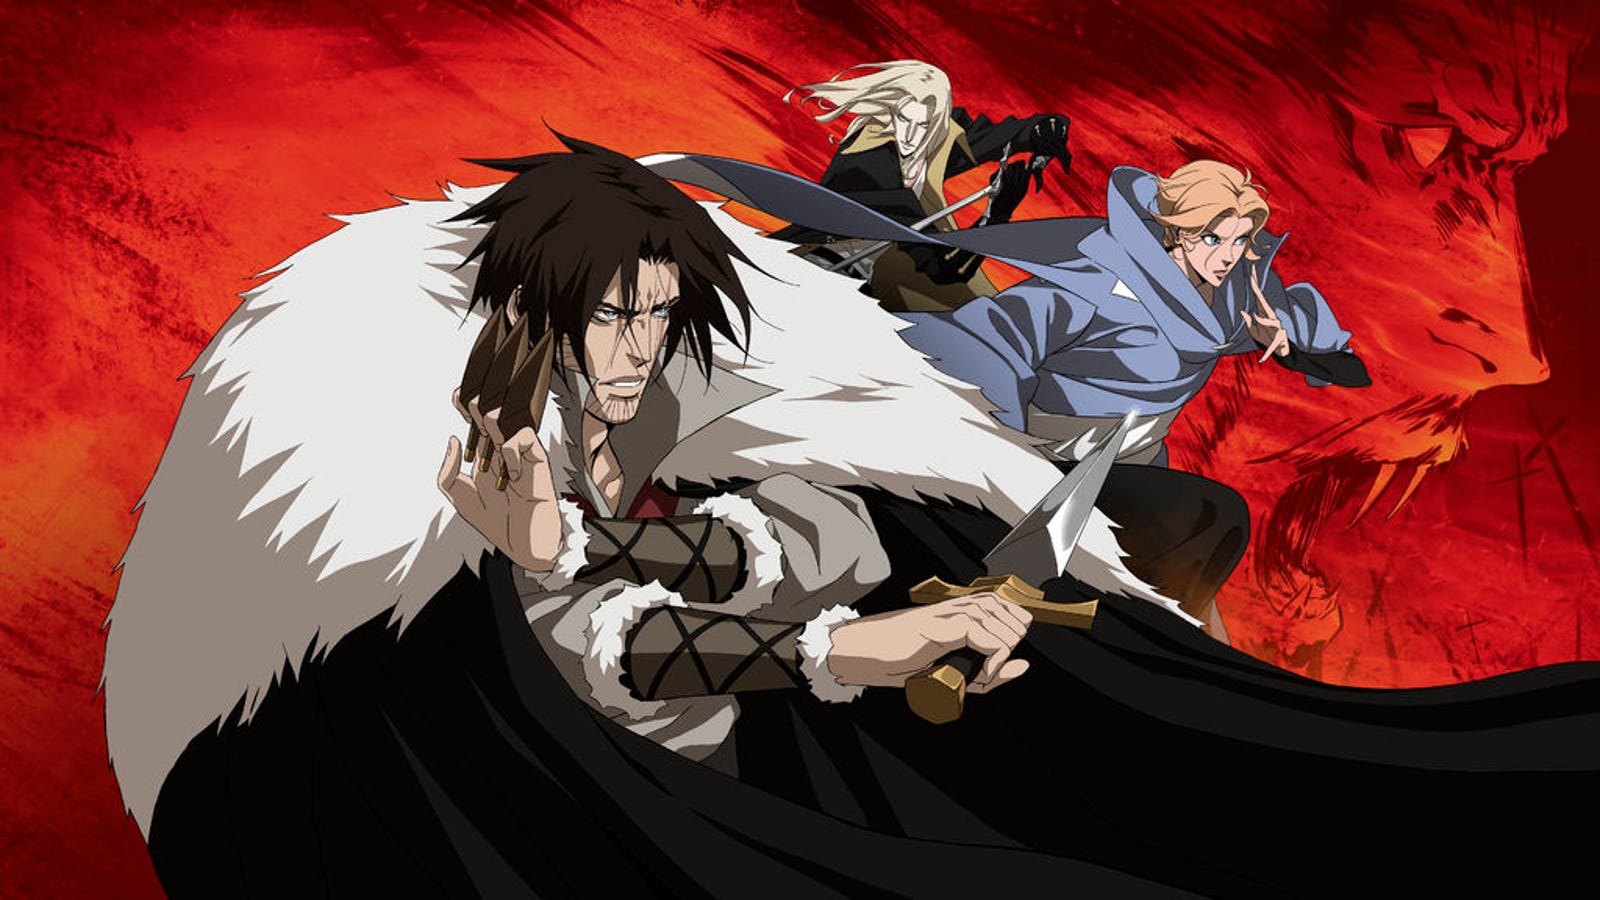 What We Loved And Didnt Love About The Castlevania Anime